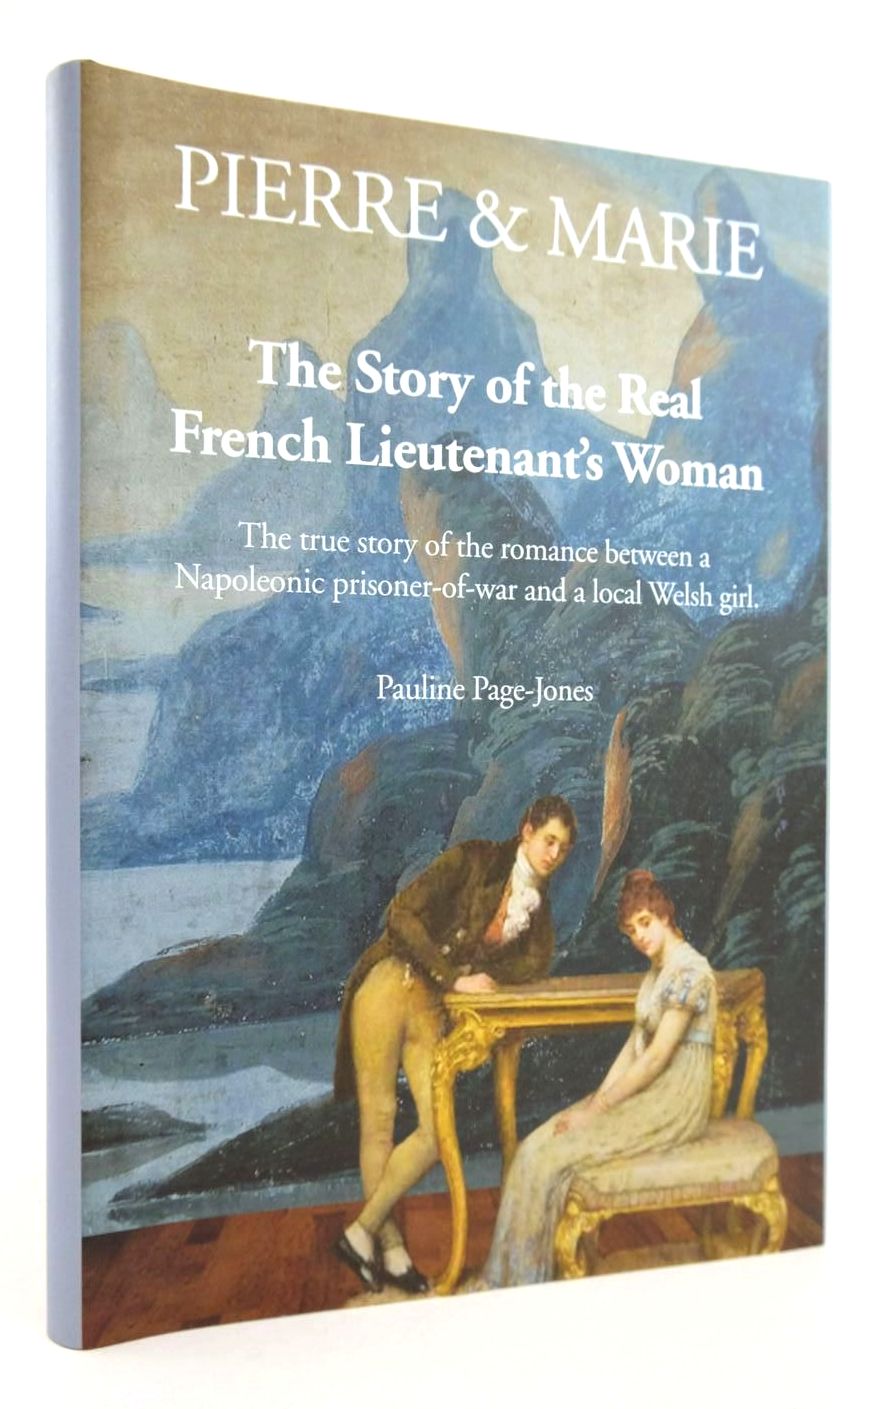 Photo of PIERRE & MARIE THE STORY OF THE REAL FRENCH LIEUTENANT'S WOMAN- Stock Number: 2132312